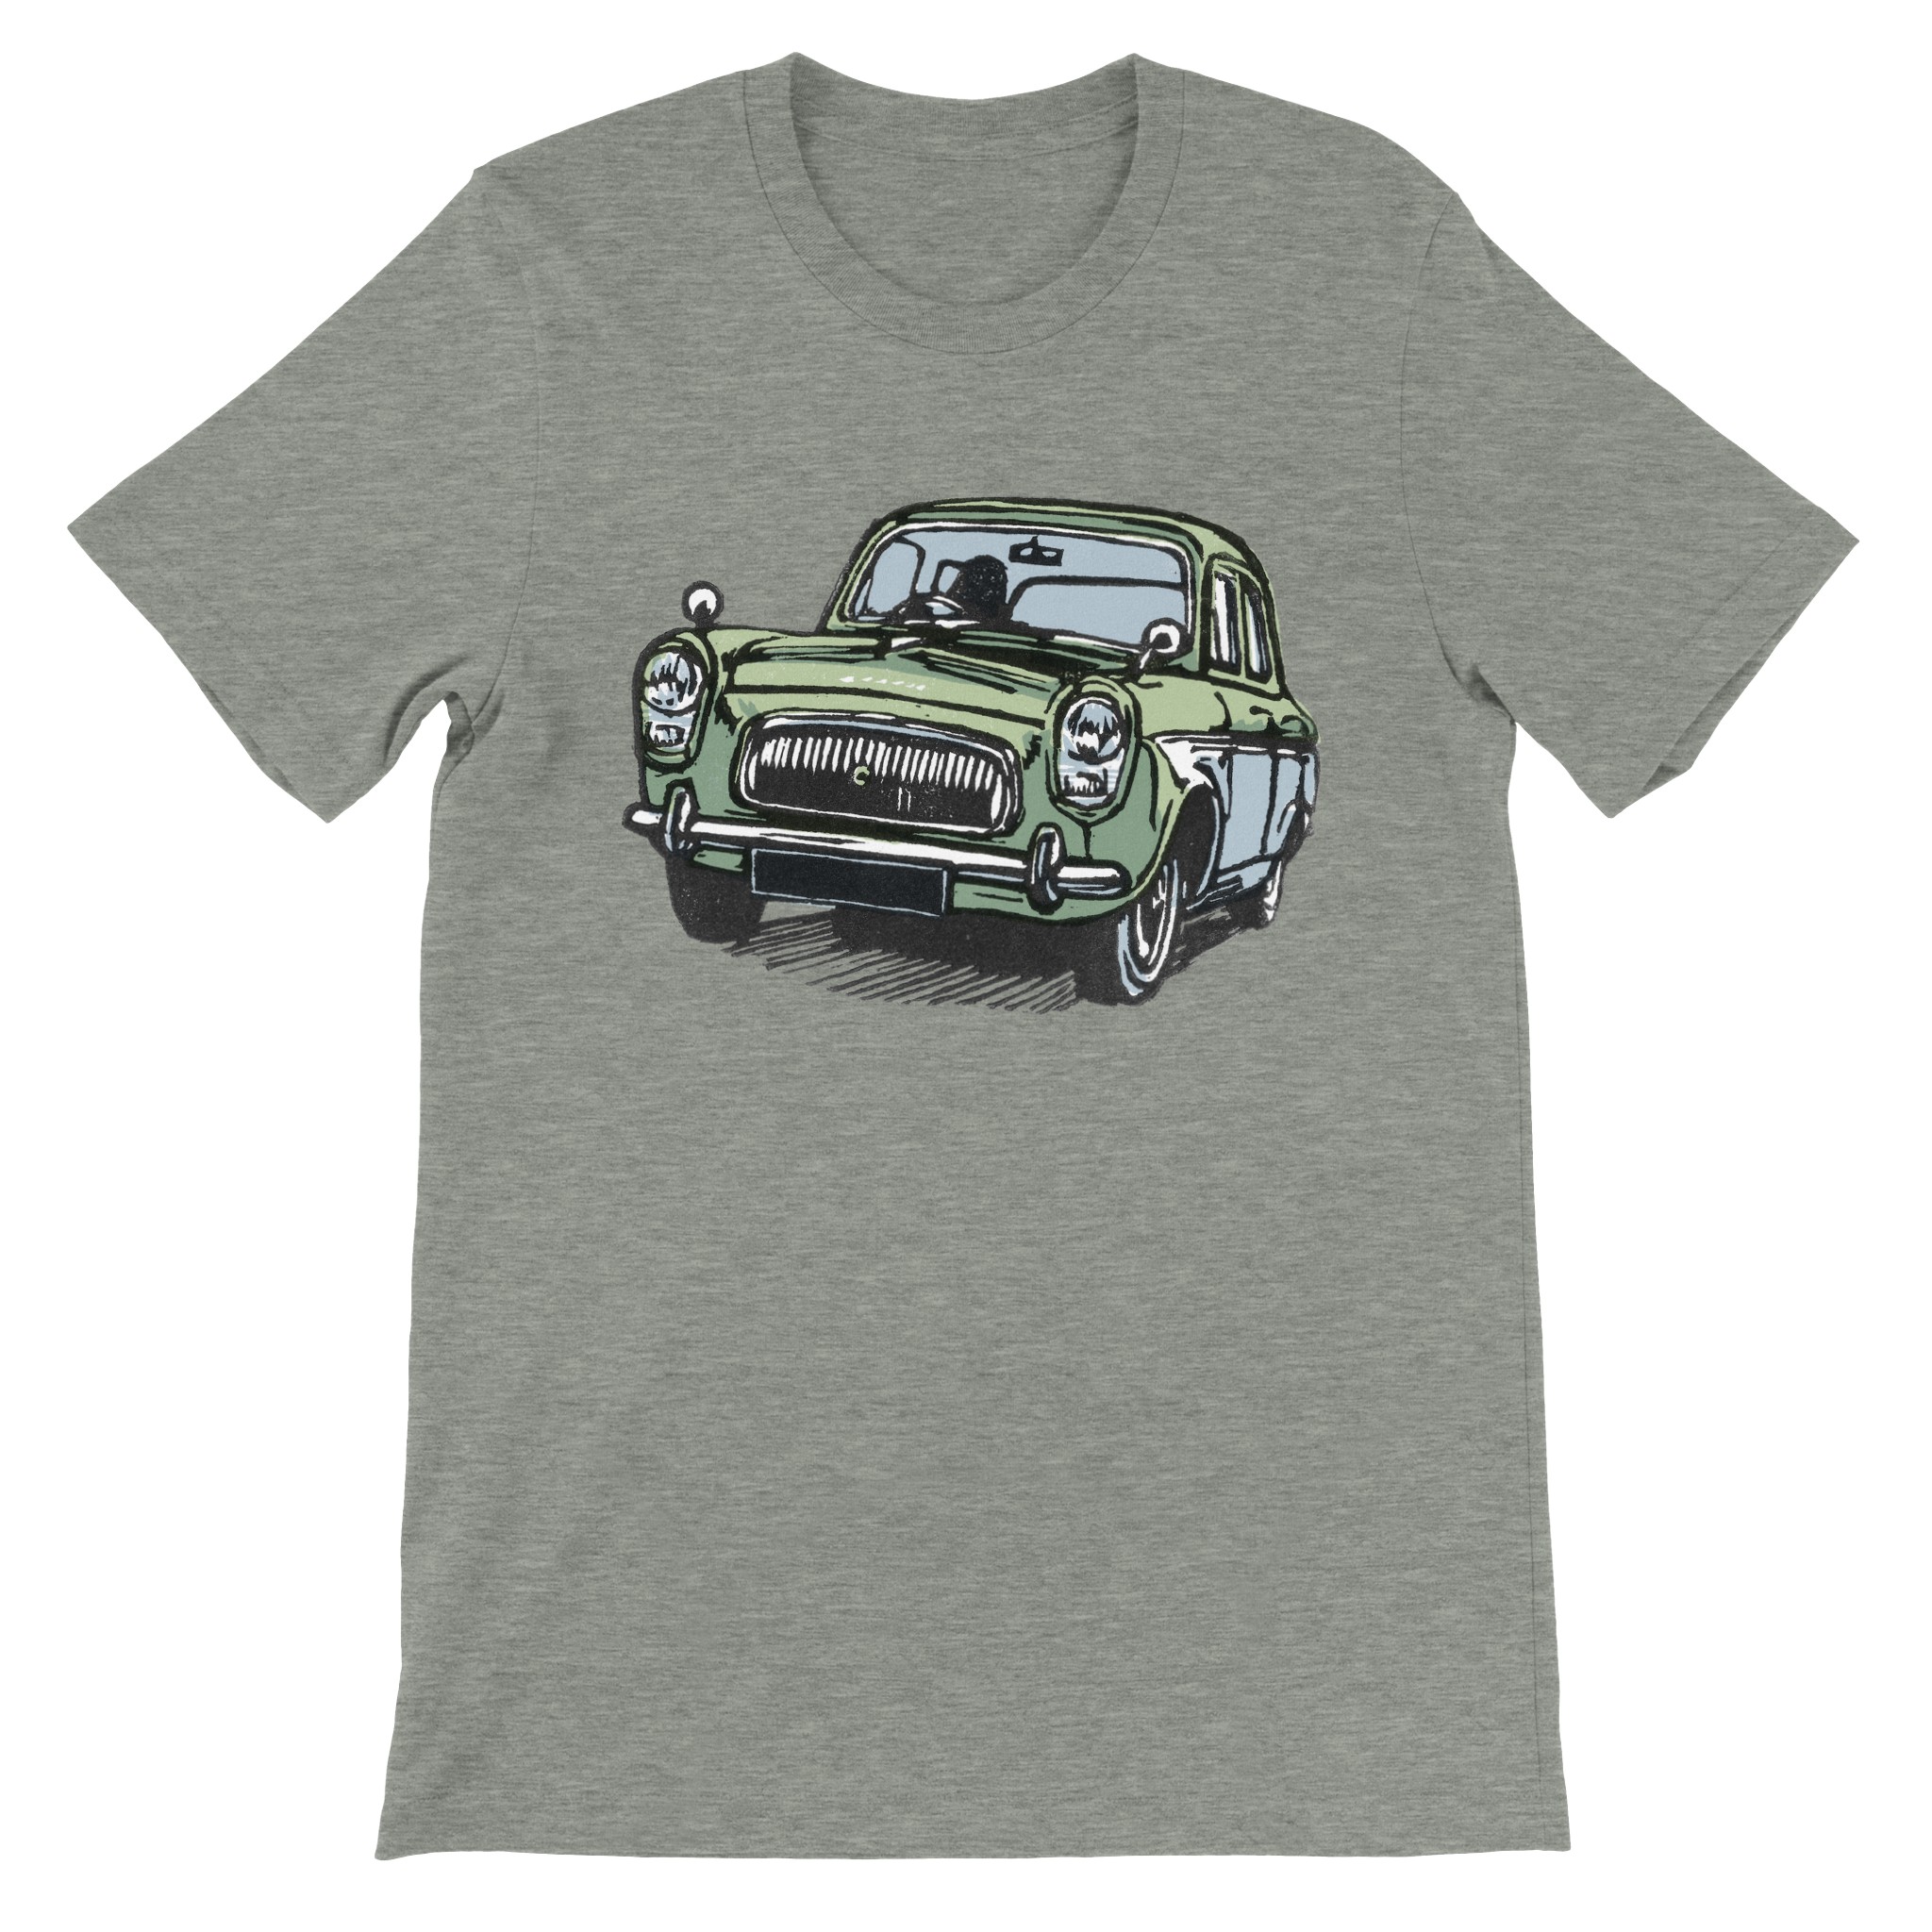 Ford Prefect Classic Car T-shirt - Inky Crow Art